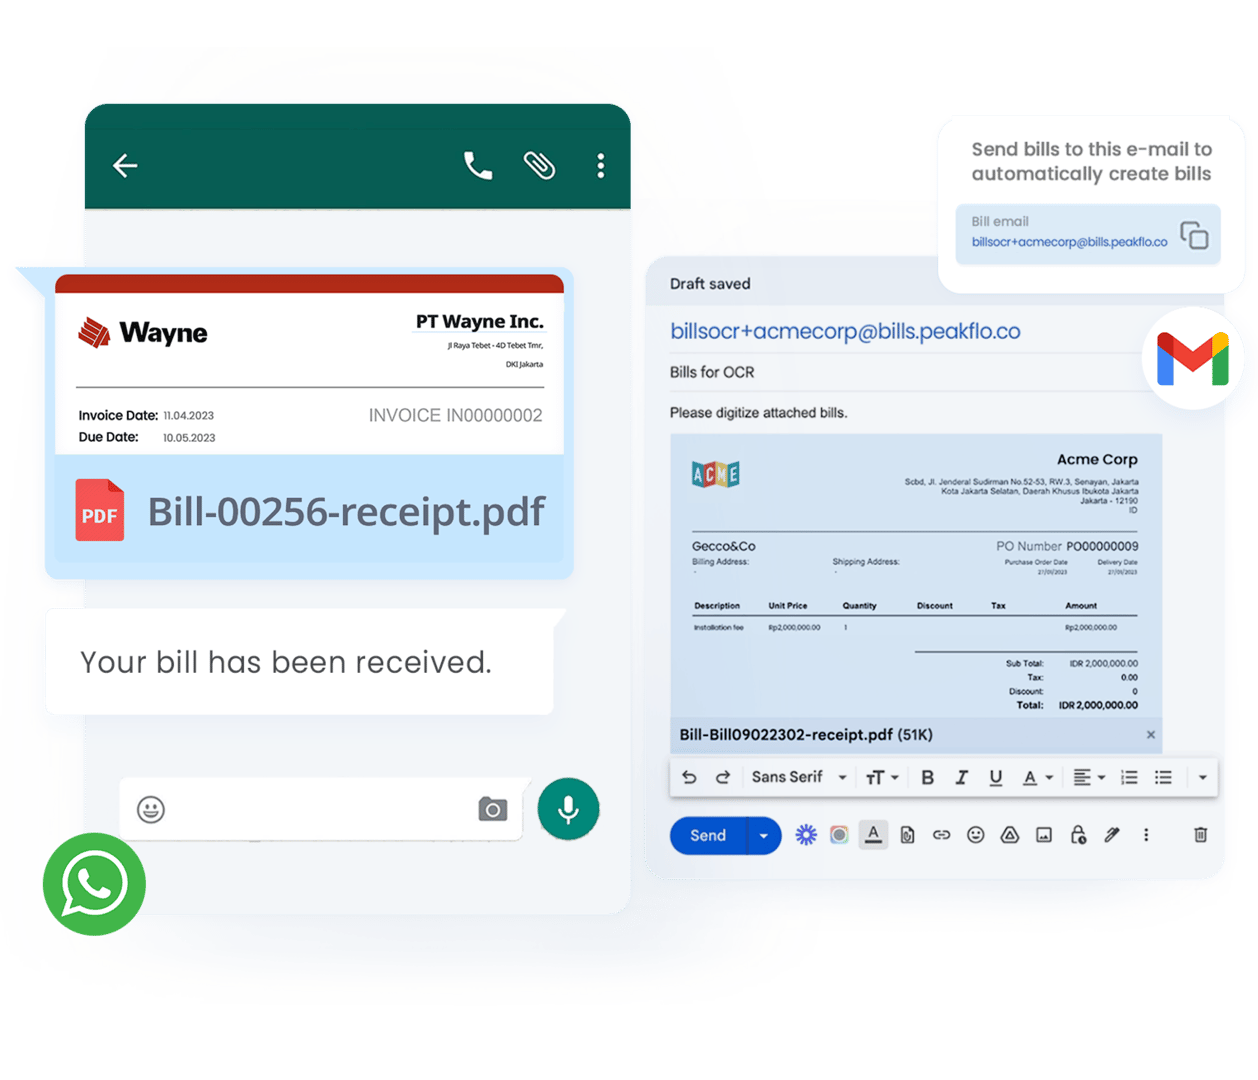 Instead of wasting your time by adding bill data manually to your accounting software or ERP, just forward your bills by email or send them to Peakflo WhatsApp and allow Peakflo to take care of the rest!